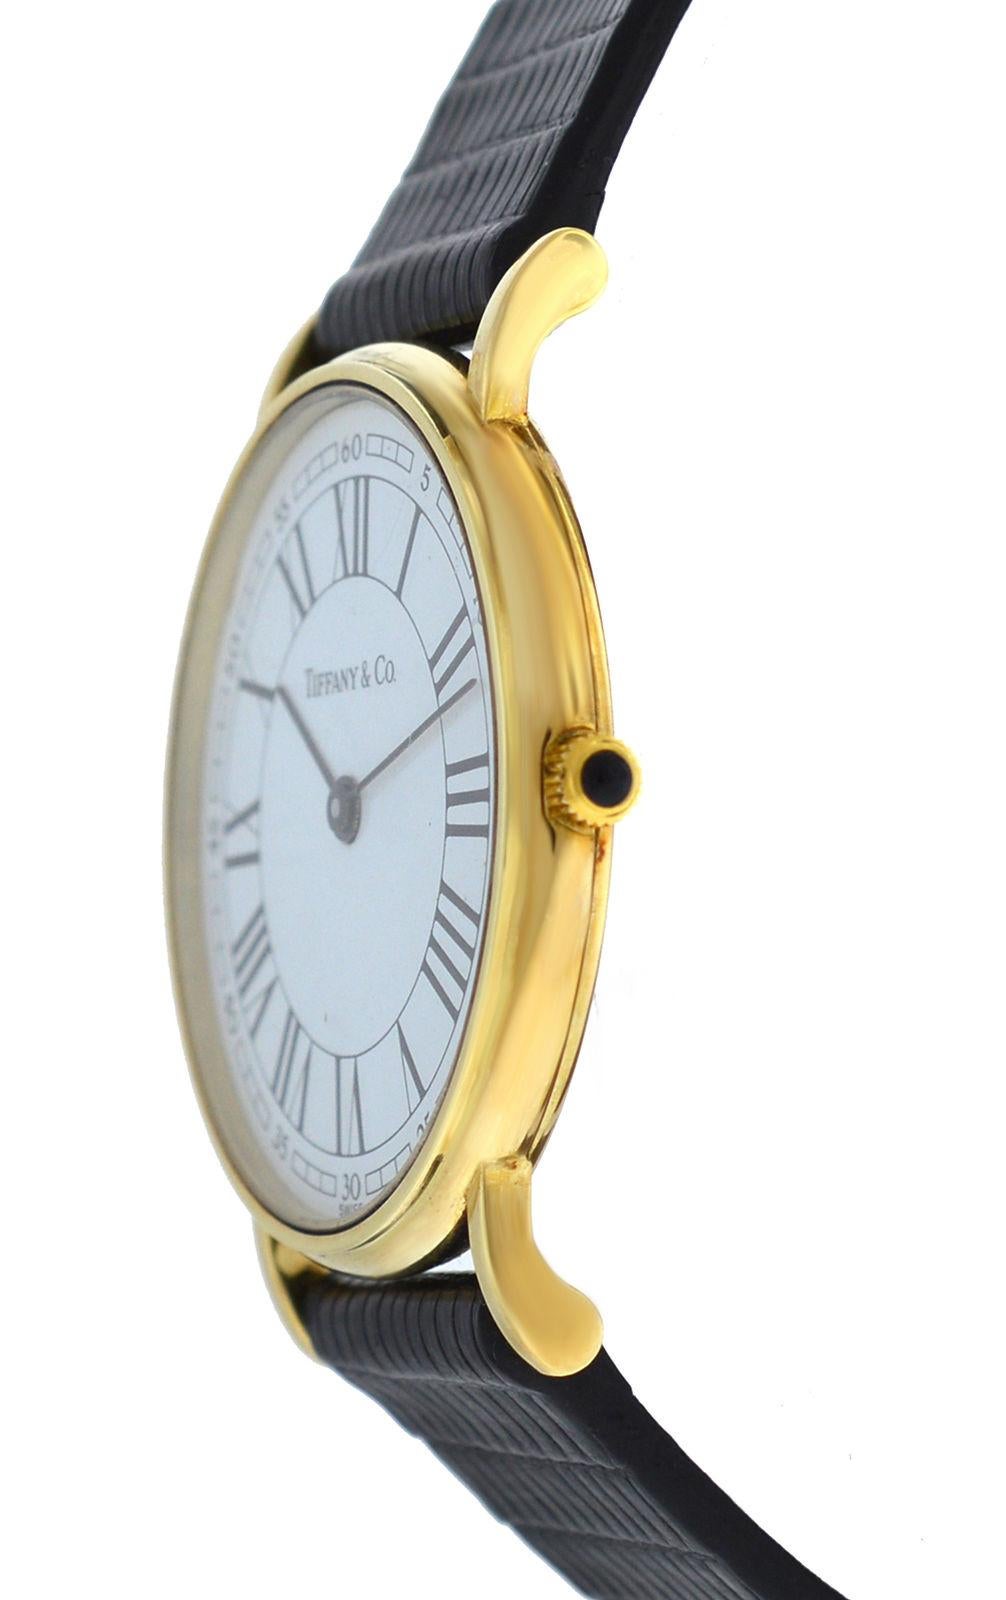 Brand	Tiffany & Co.
Model	Classic
Gender	Ladies
Condition	Pre - Owned
Movement	Swiss Quartz
Case Material	14K Yellow Gold
Bracelet / Strap Material	Genuine Lizard
Clasp / Buckle Material	Gold plated steel
Clasp Type	Tang
Bracelet / Strap width	16 mm